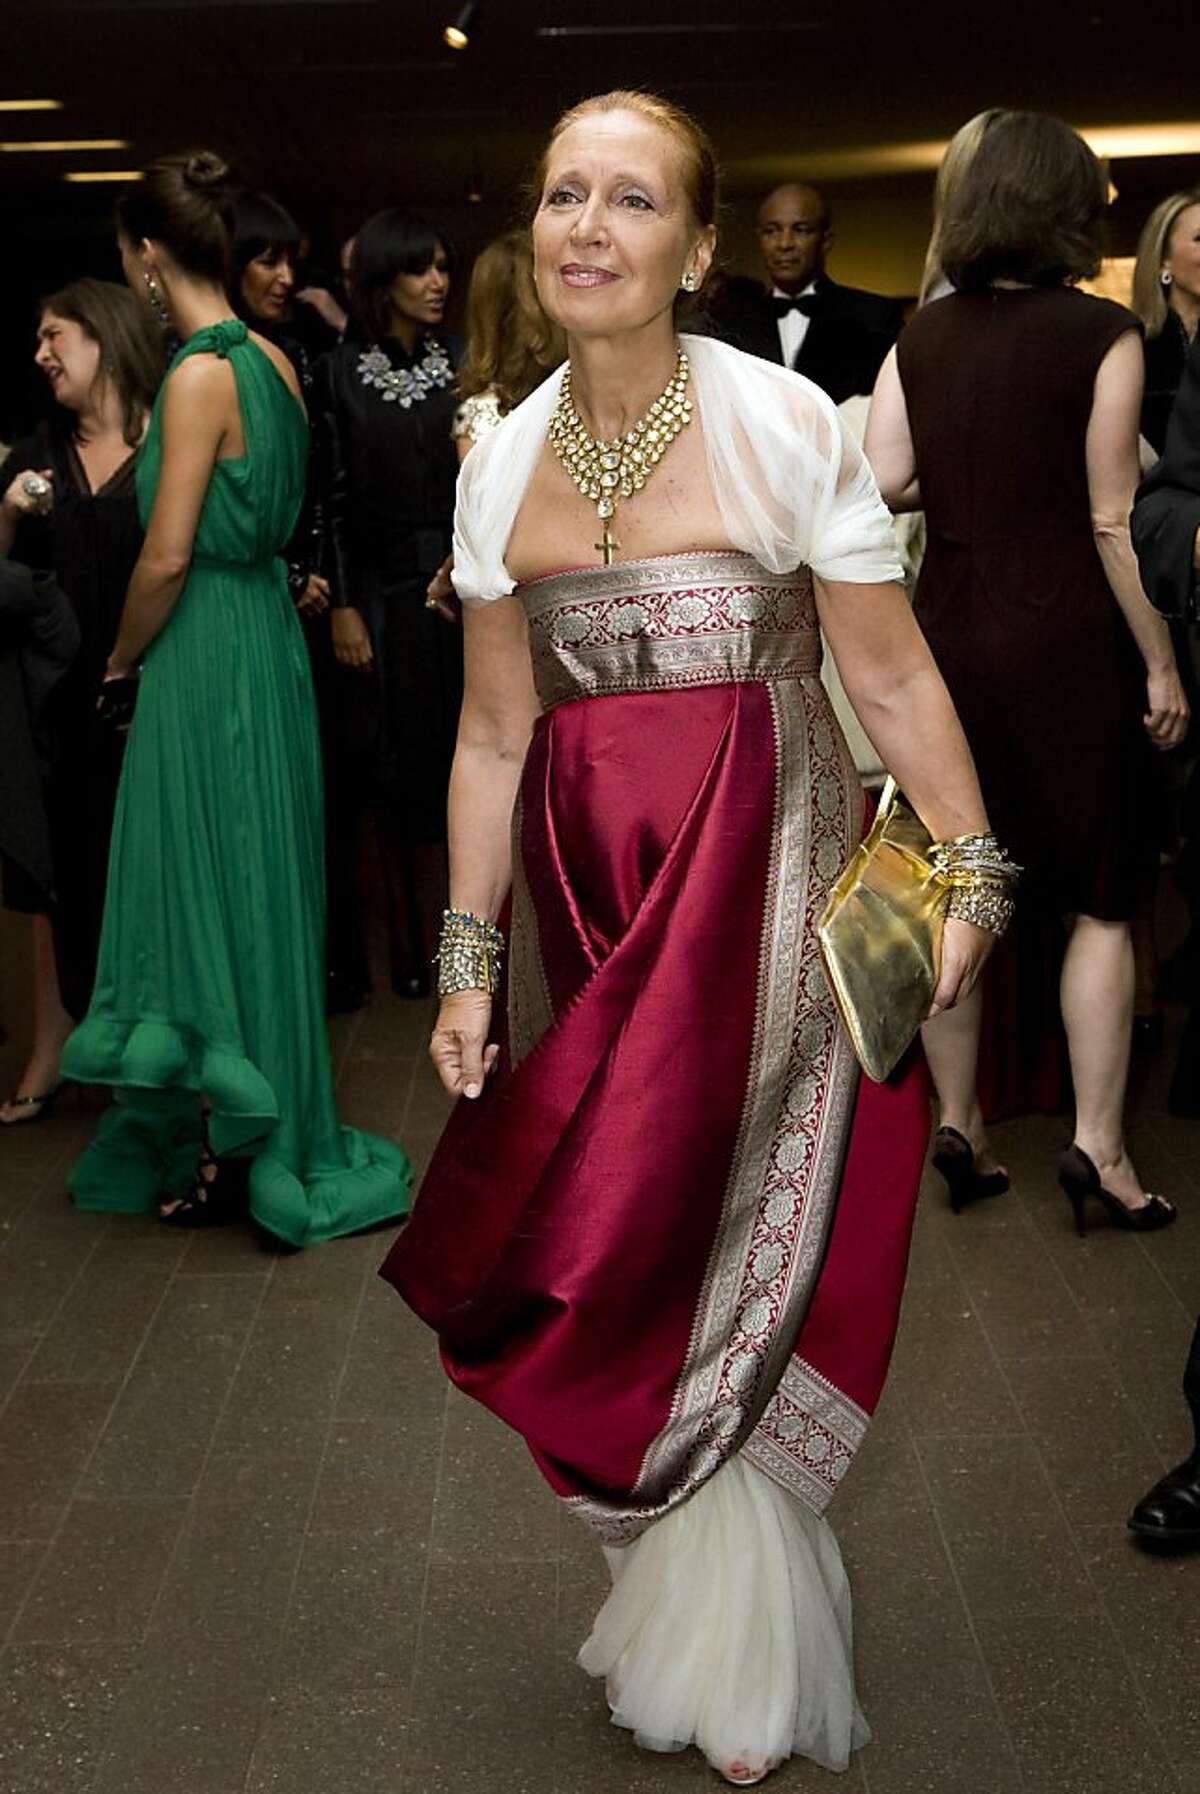 Danielle Steel attends the Yves Saint Laurent Opening Gala at the de Young Museum wearing a gown by Alexander McQueen in San Francisco, Calif., on Thursday, October 30, 2008.